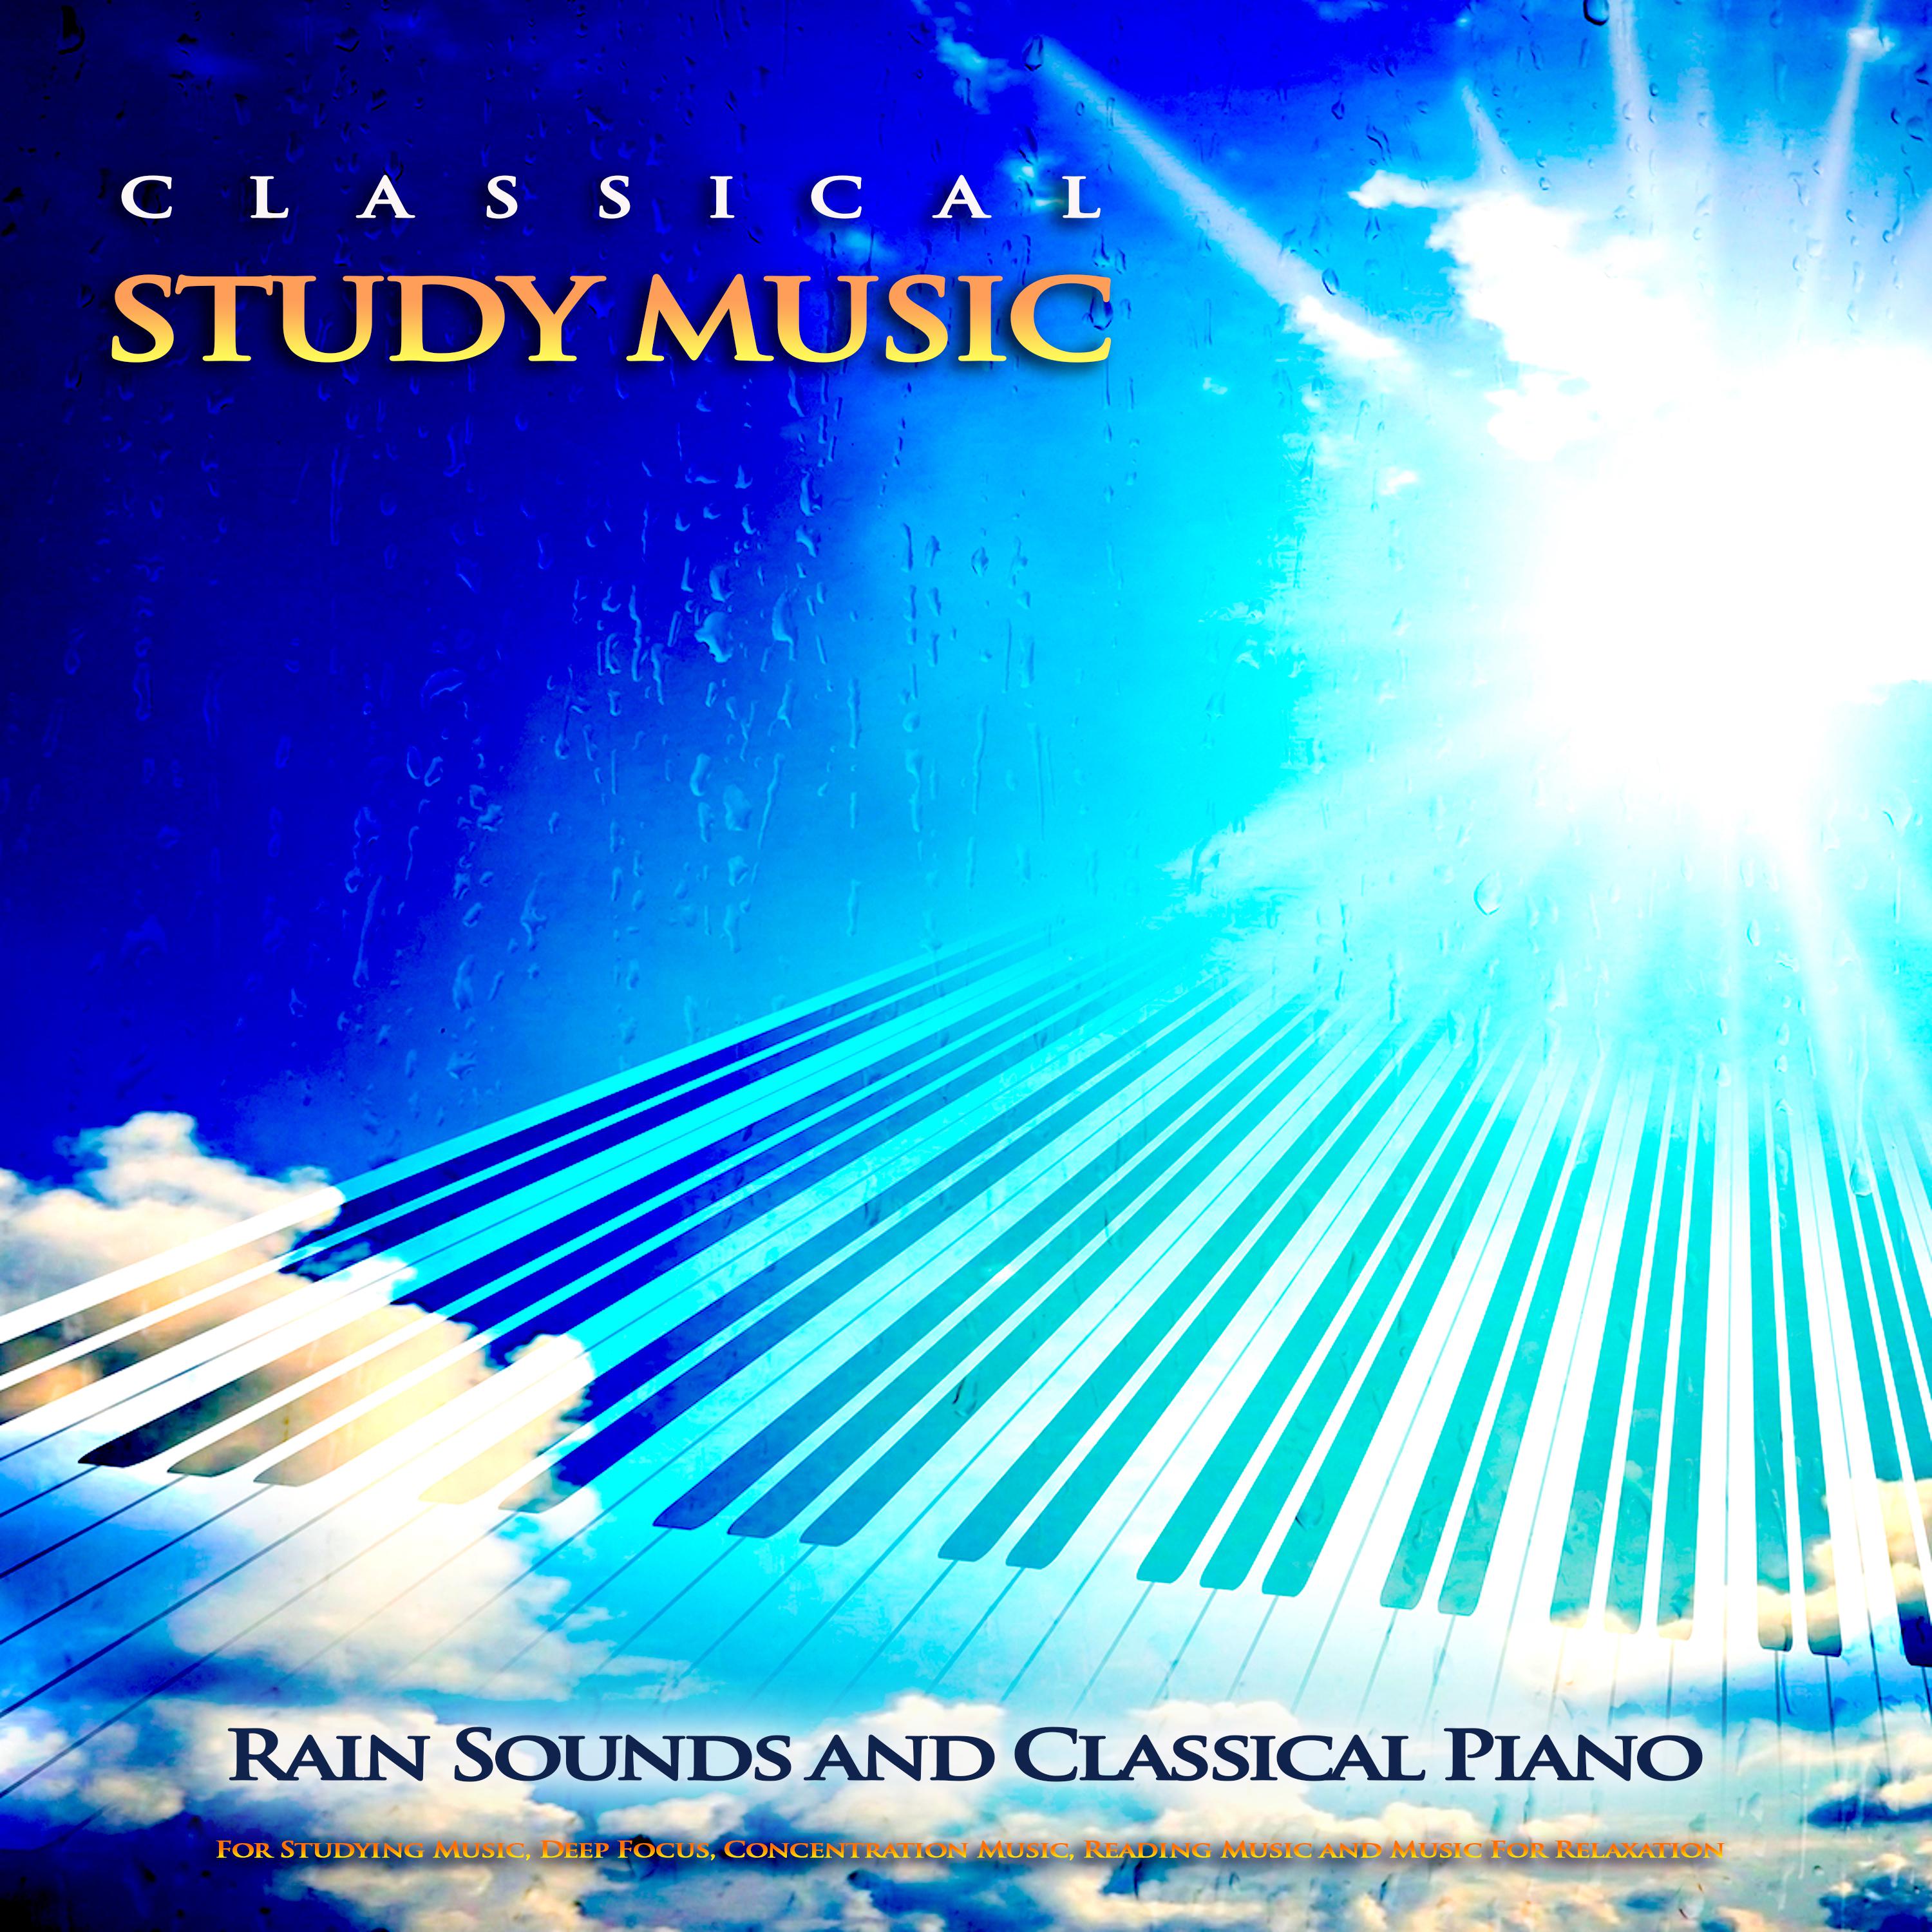 Canon in D - Pachelbel - Classical Piano Music and Rain Sounds - Classical Study Music